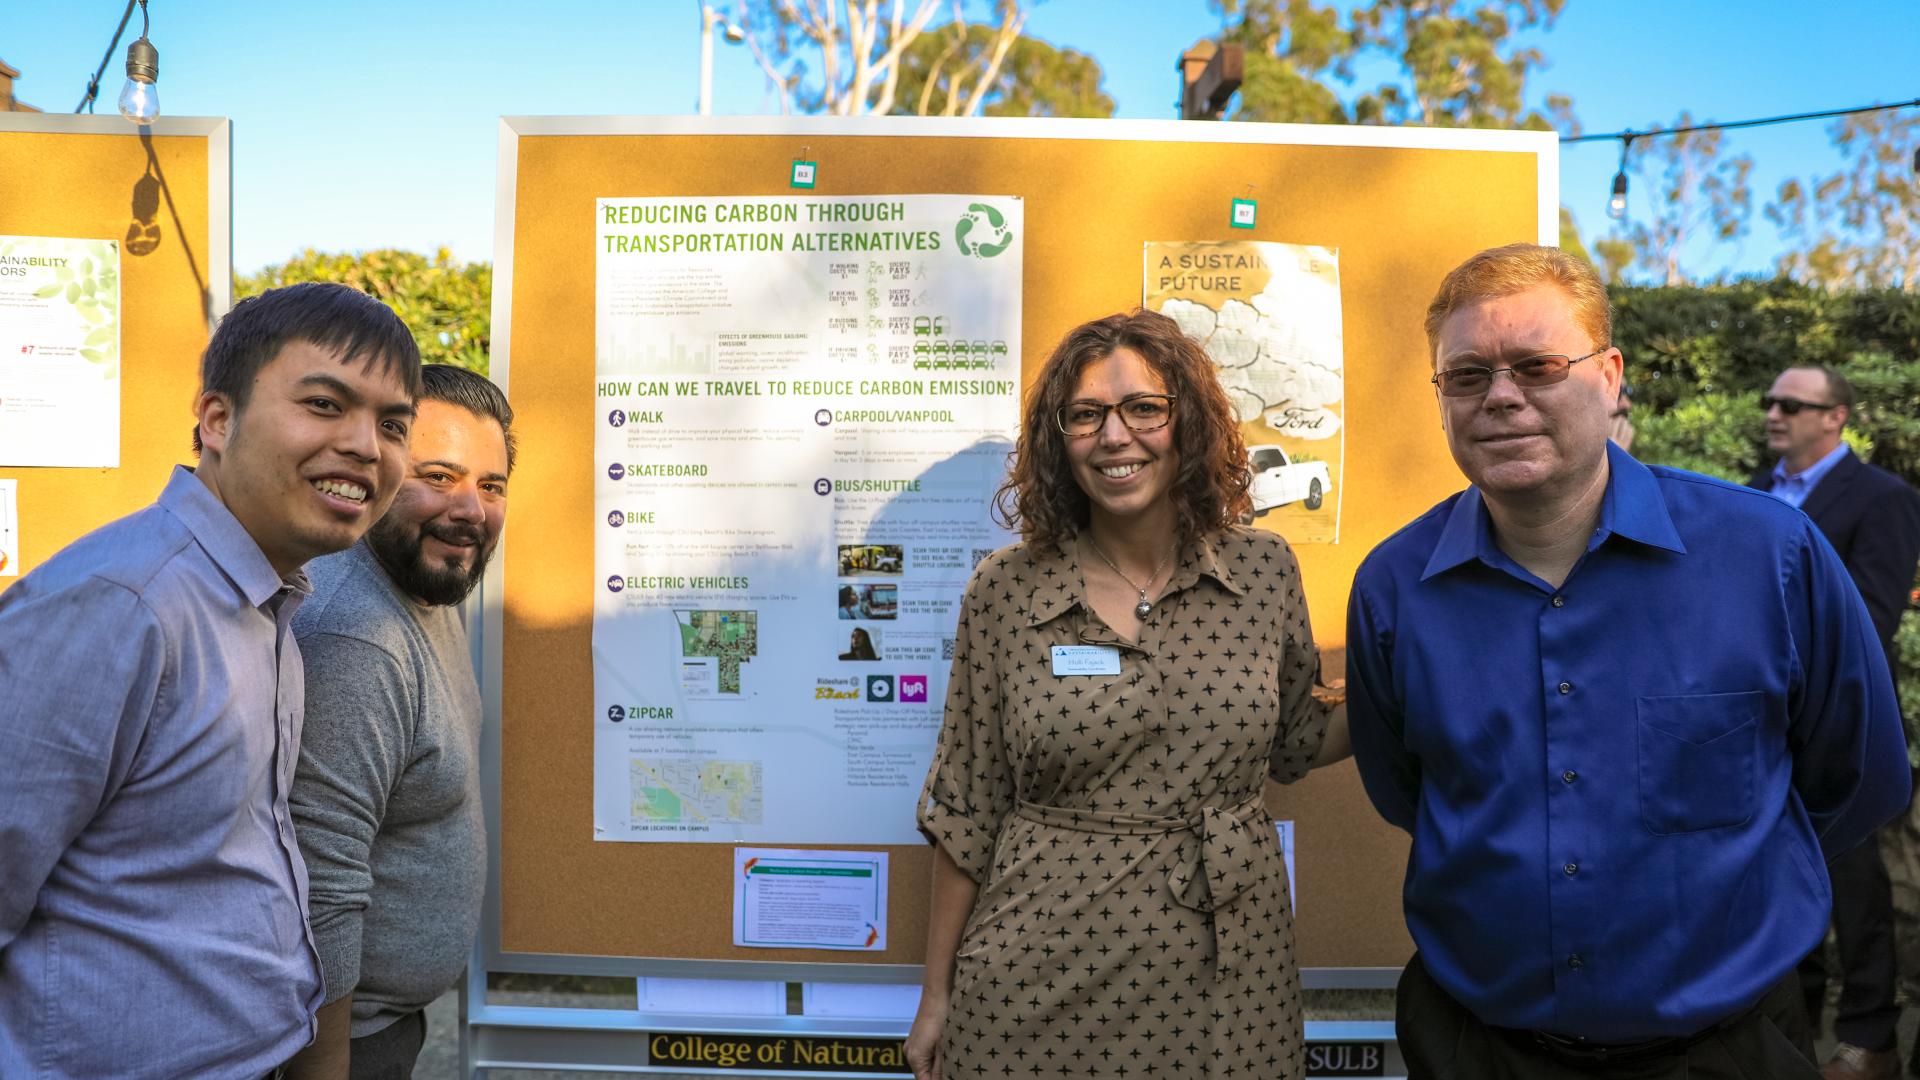 CSULB Green Generation Mixer and Sustainability Project Showcase - SMBA Students